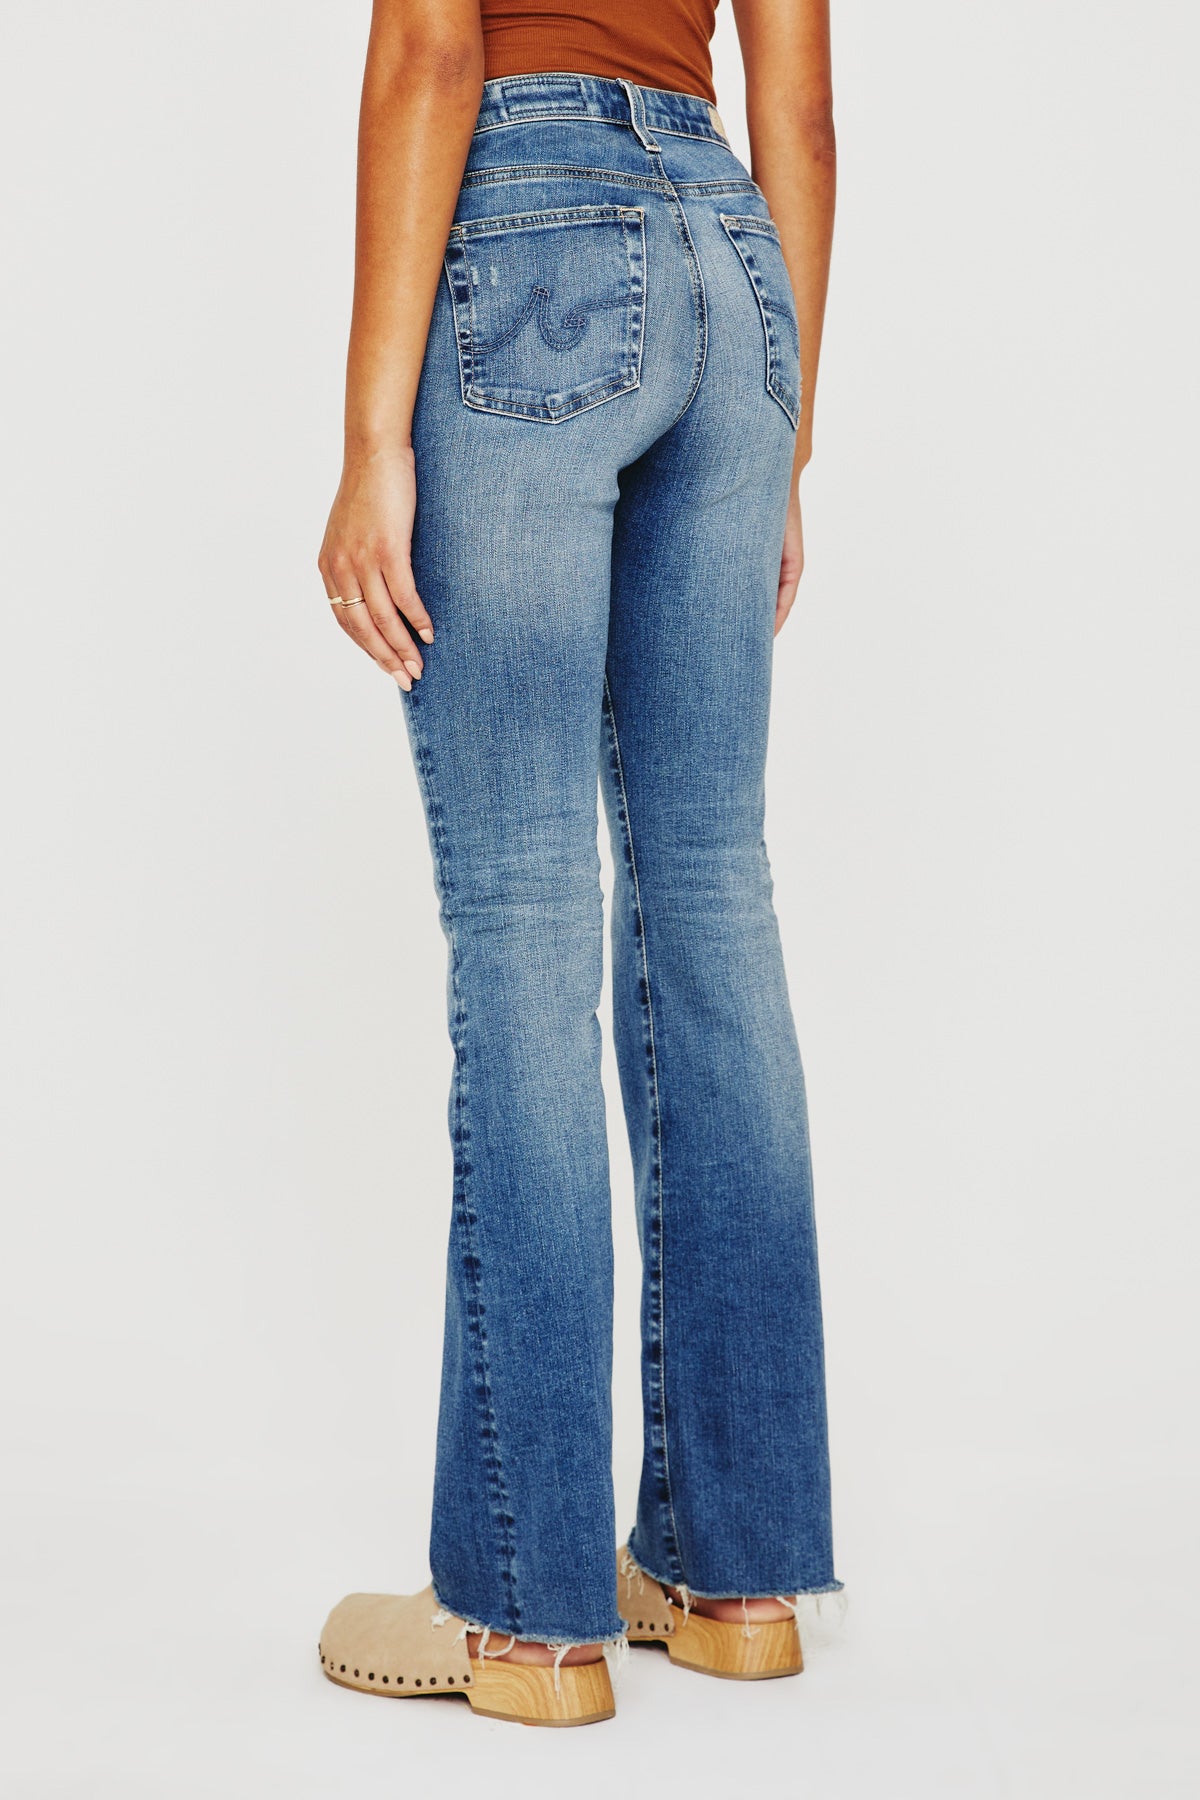 ag jeans farrah high rise boot cut jean in 14 years intentional blue, rear view